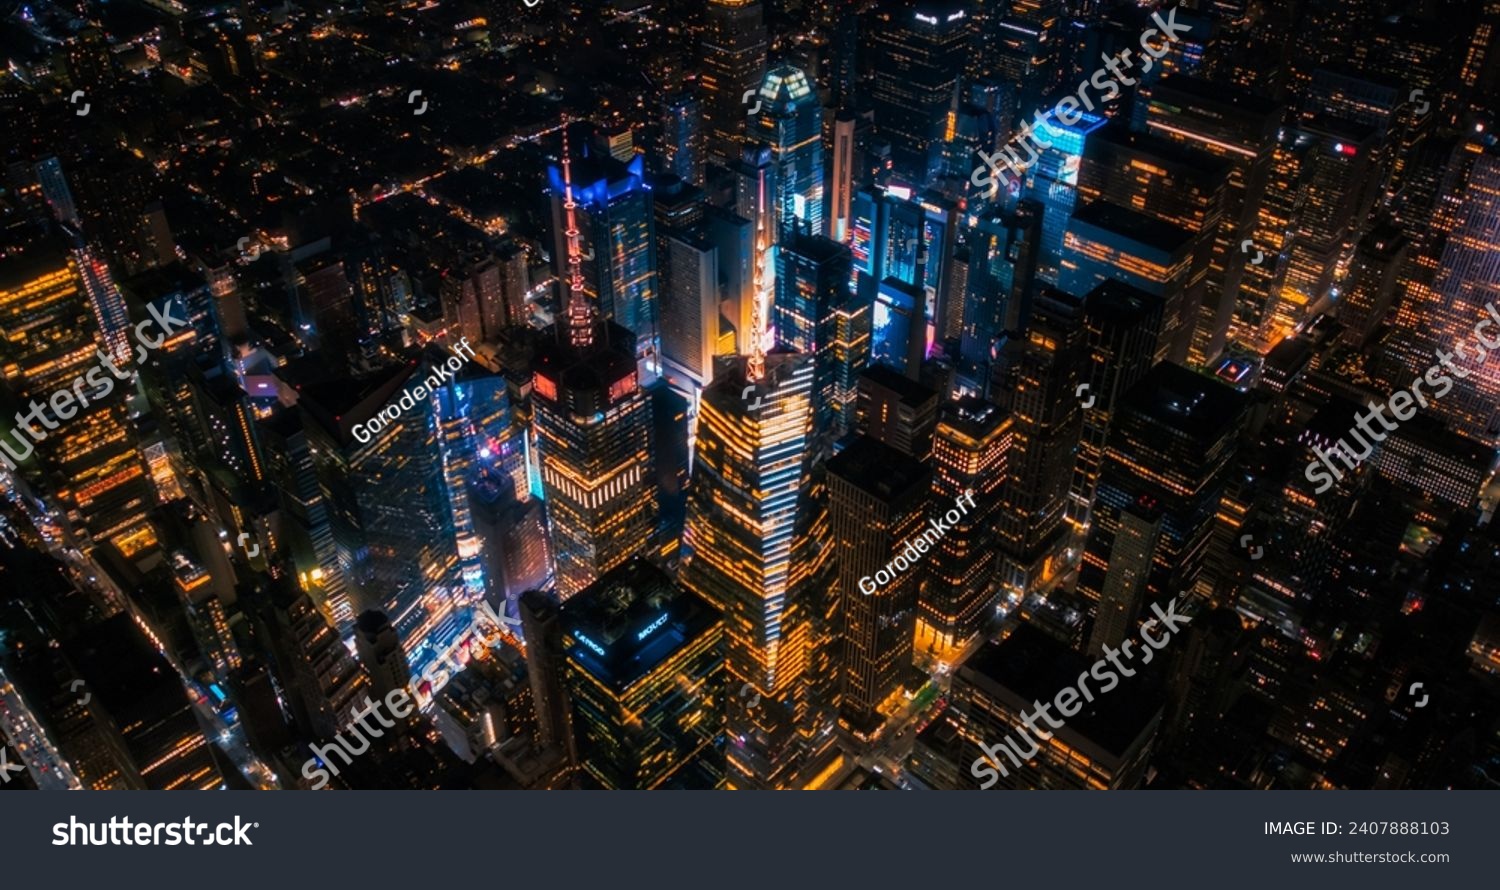 New York Concrete Jungle at Night. Aerial Photo from a Helicopter Tour Around the Center of the Big Apple. Scenes with Times Square District with Crowds of Tourists Enjoying Manhattan Nightlife #2407888103